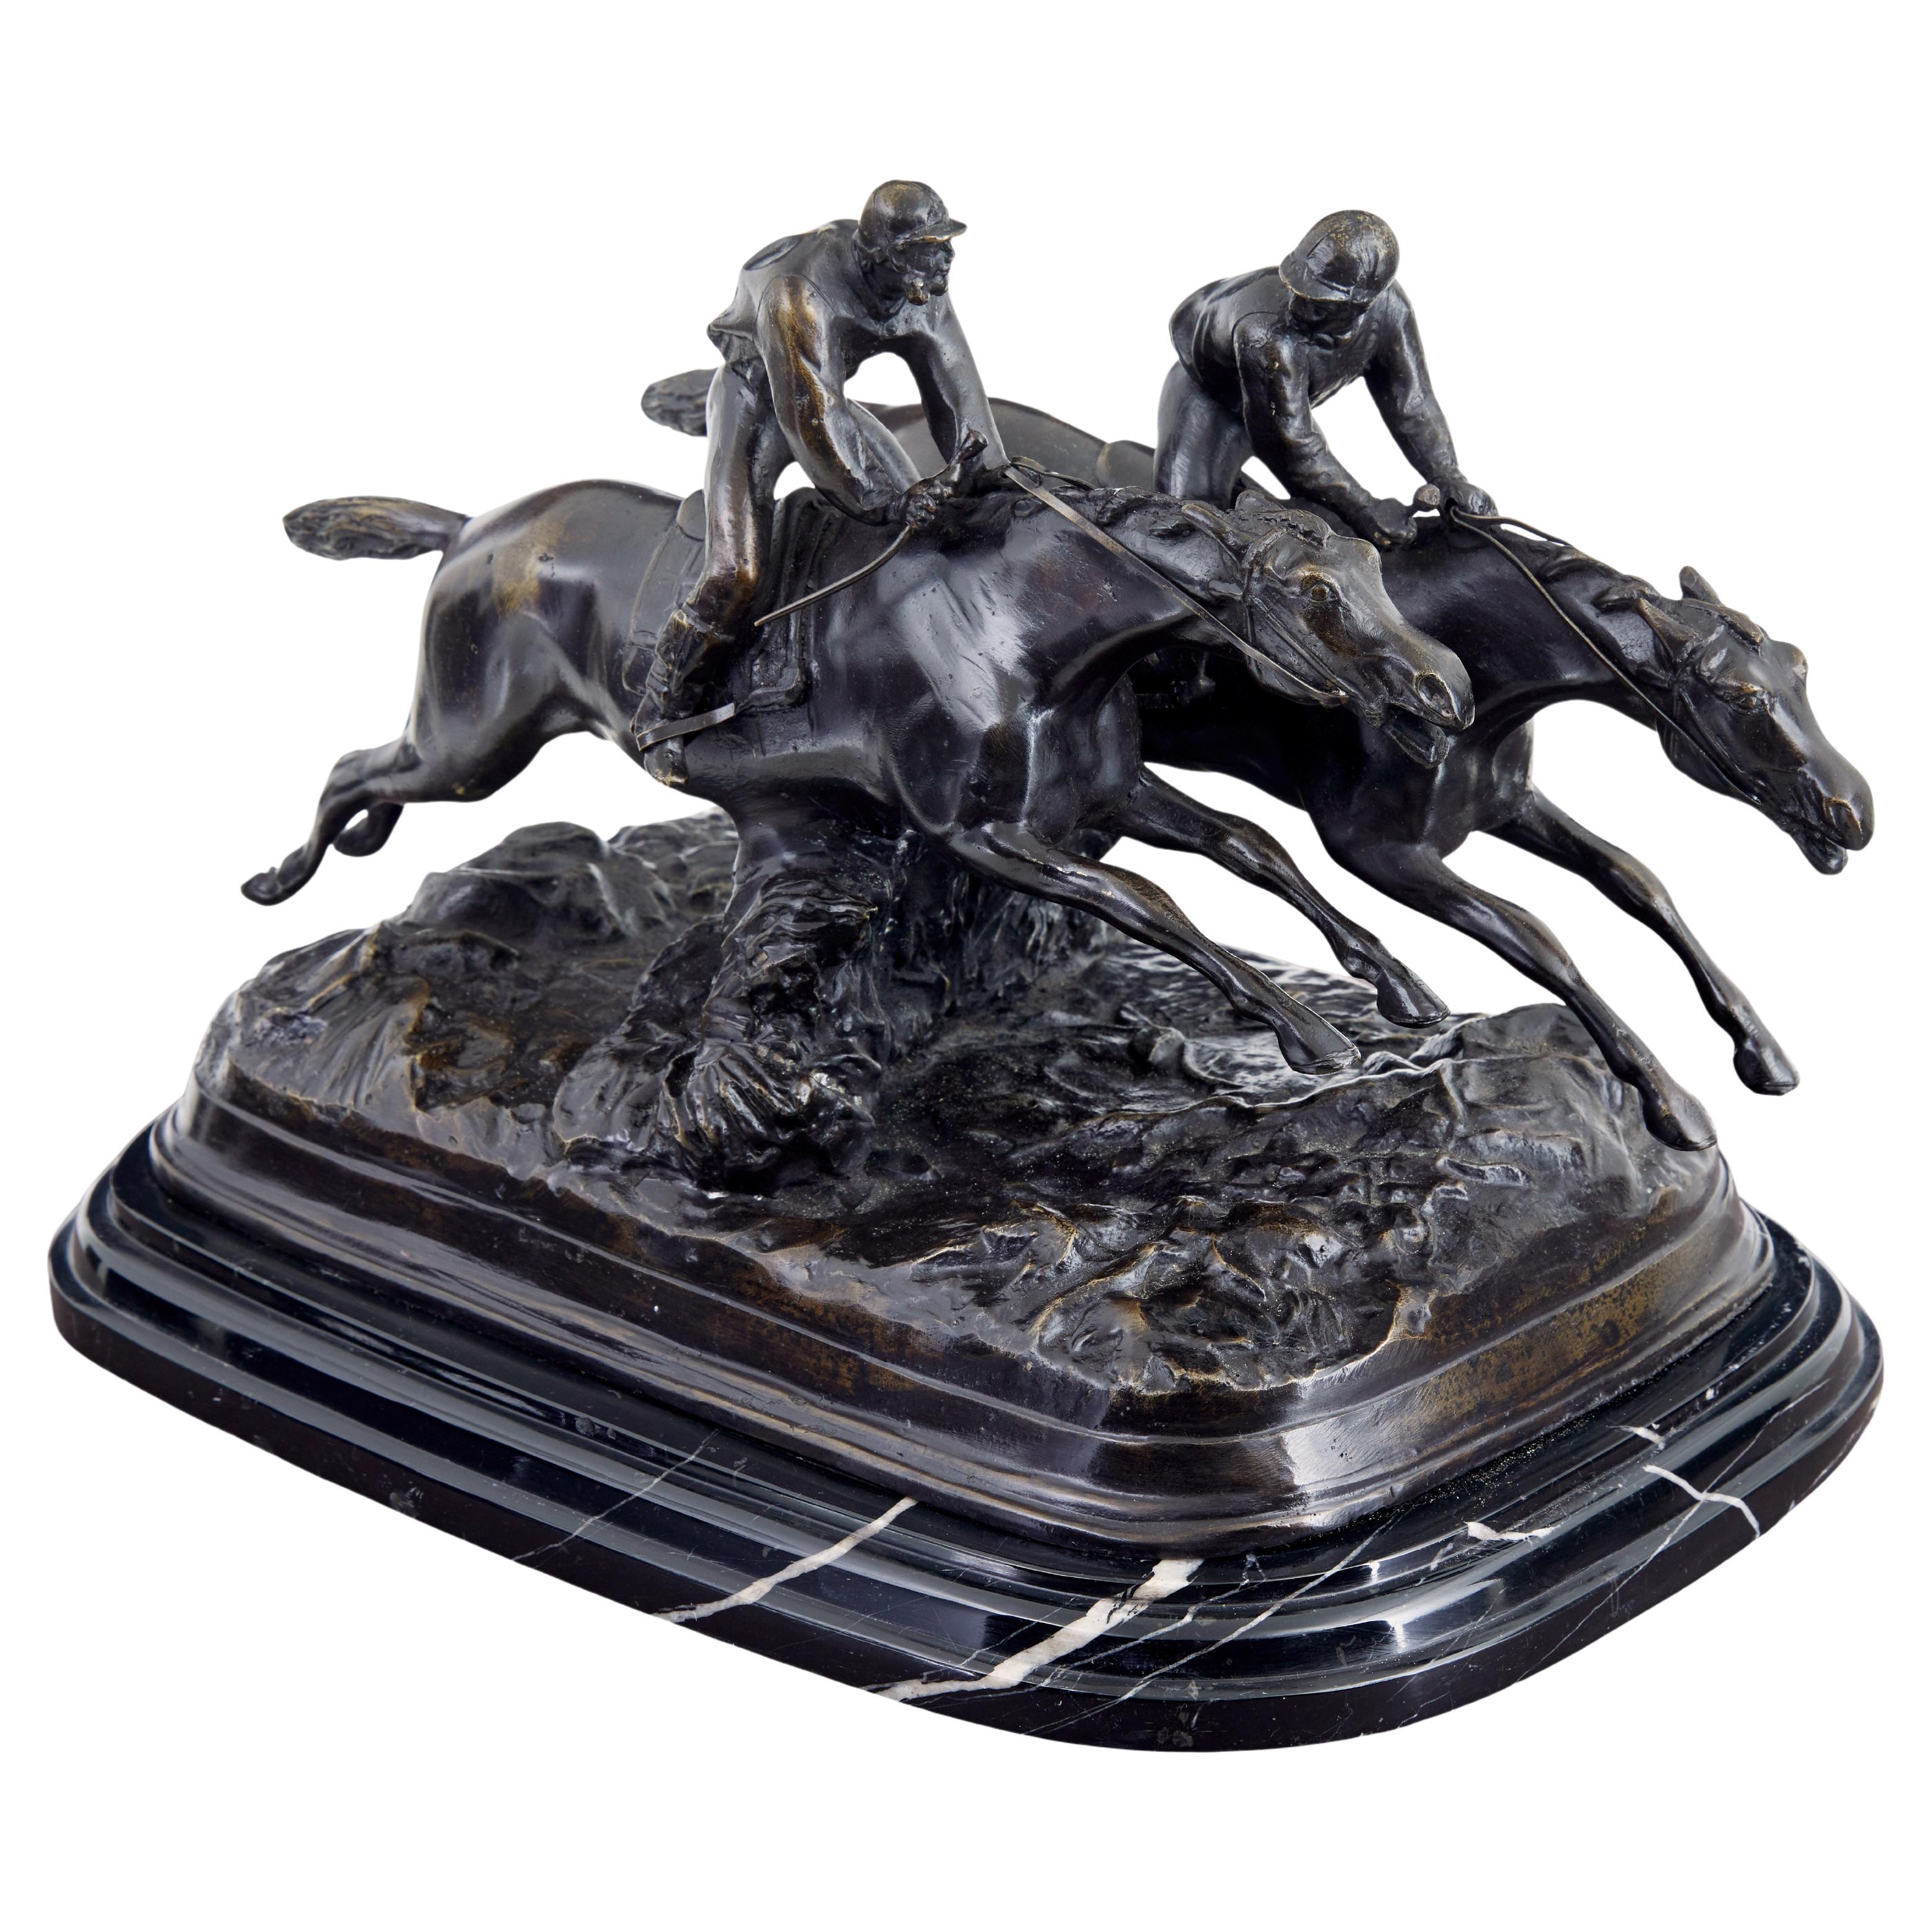 Good quality horse racing desk top bronze and marble